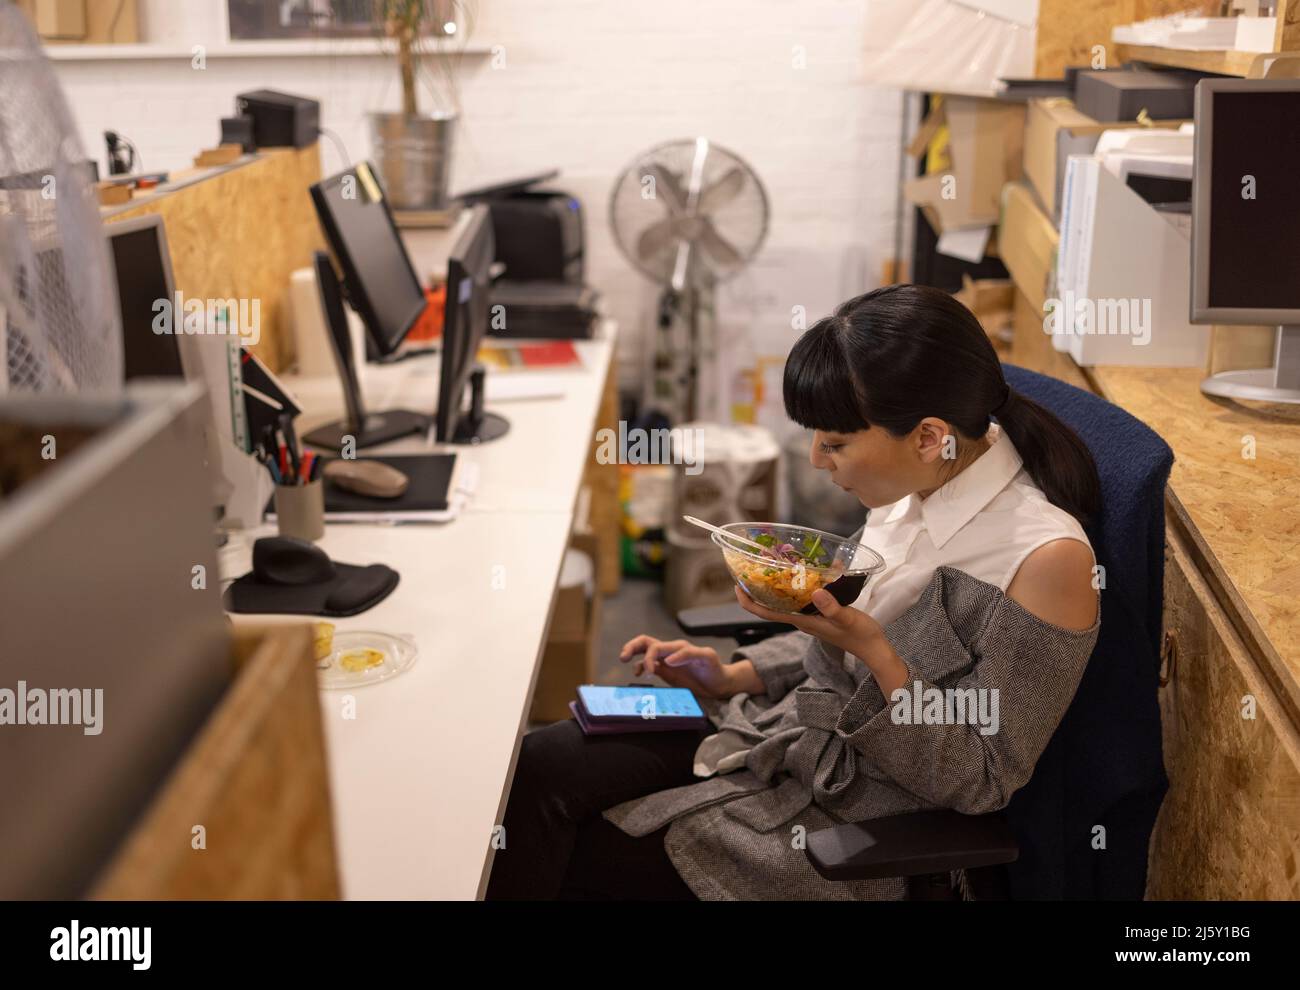 Businesswoman eating lunch and using smart phone in office Stock Photo